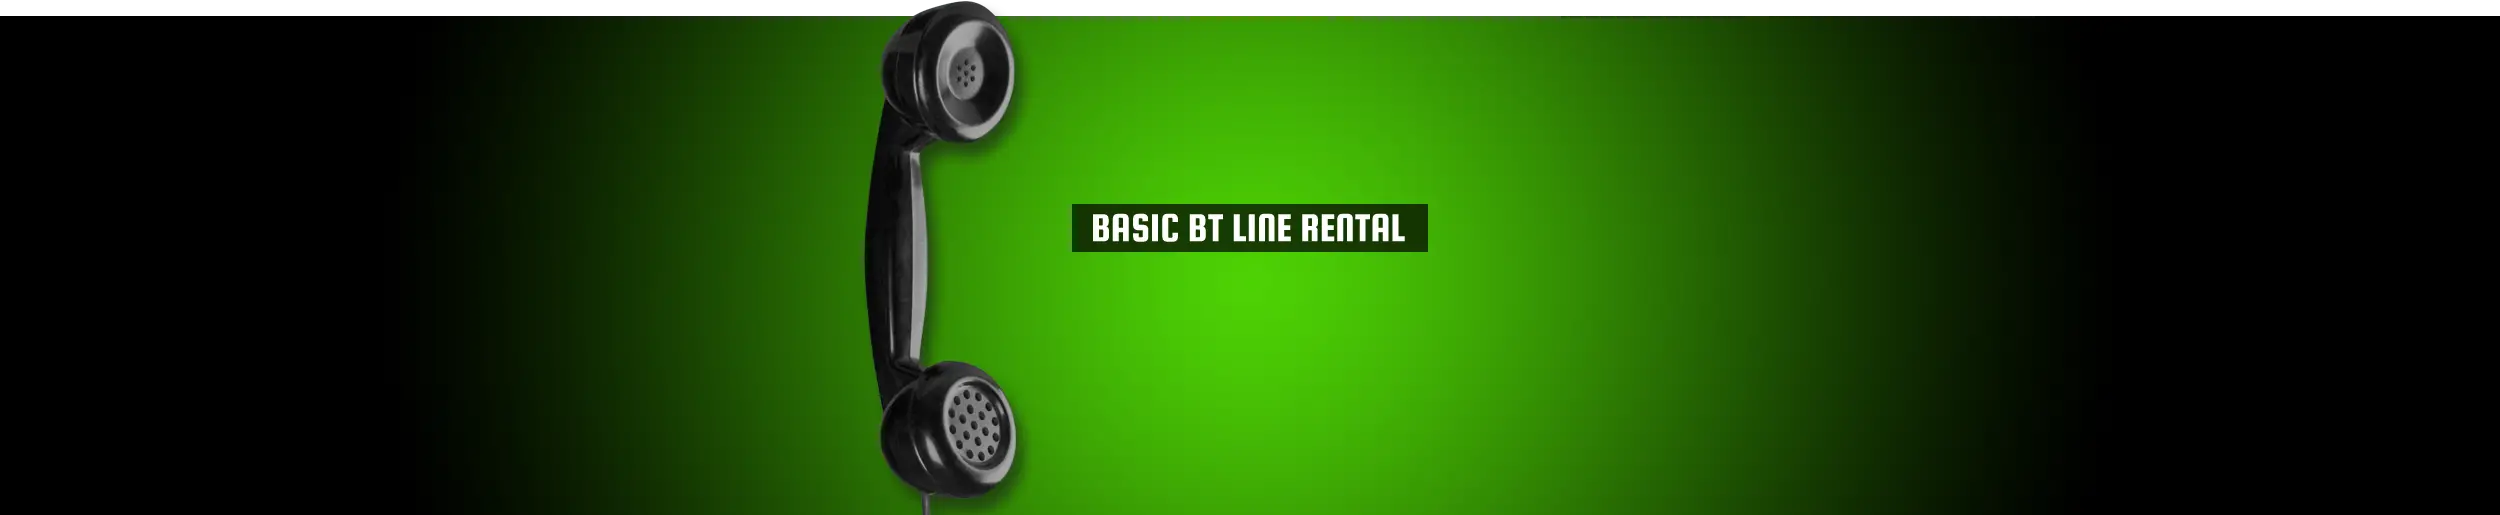 52Degrees Line Rental - feature image | "basic BT line rental" | a black old-fashioned phone on a vivid green background | Telecoms Solutions, Norwich